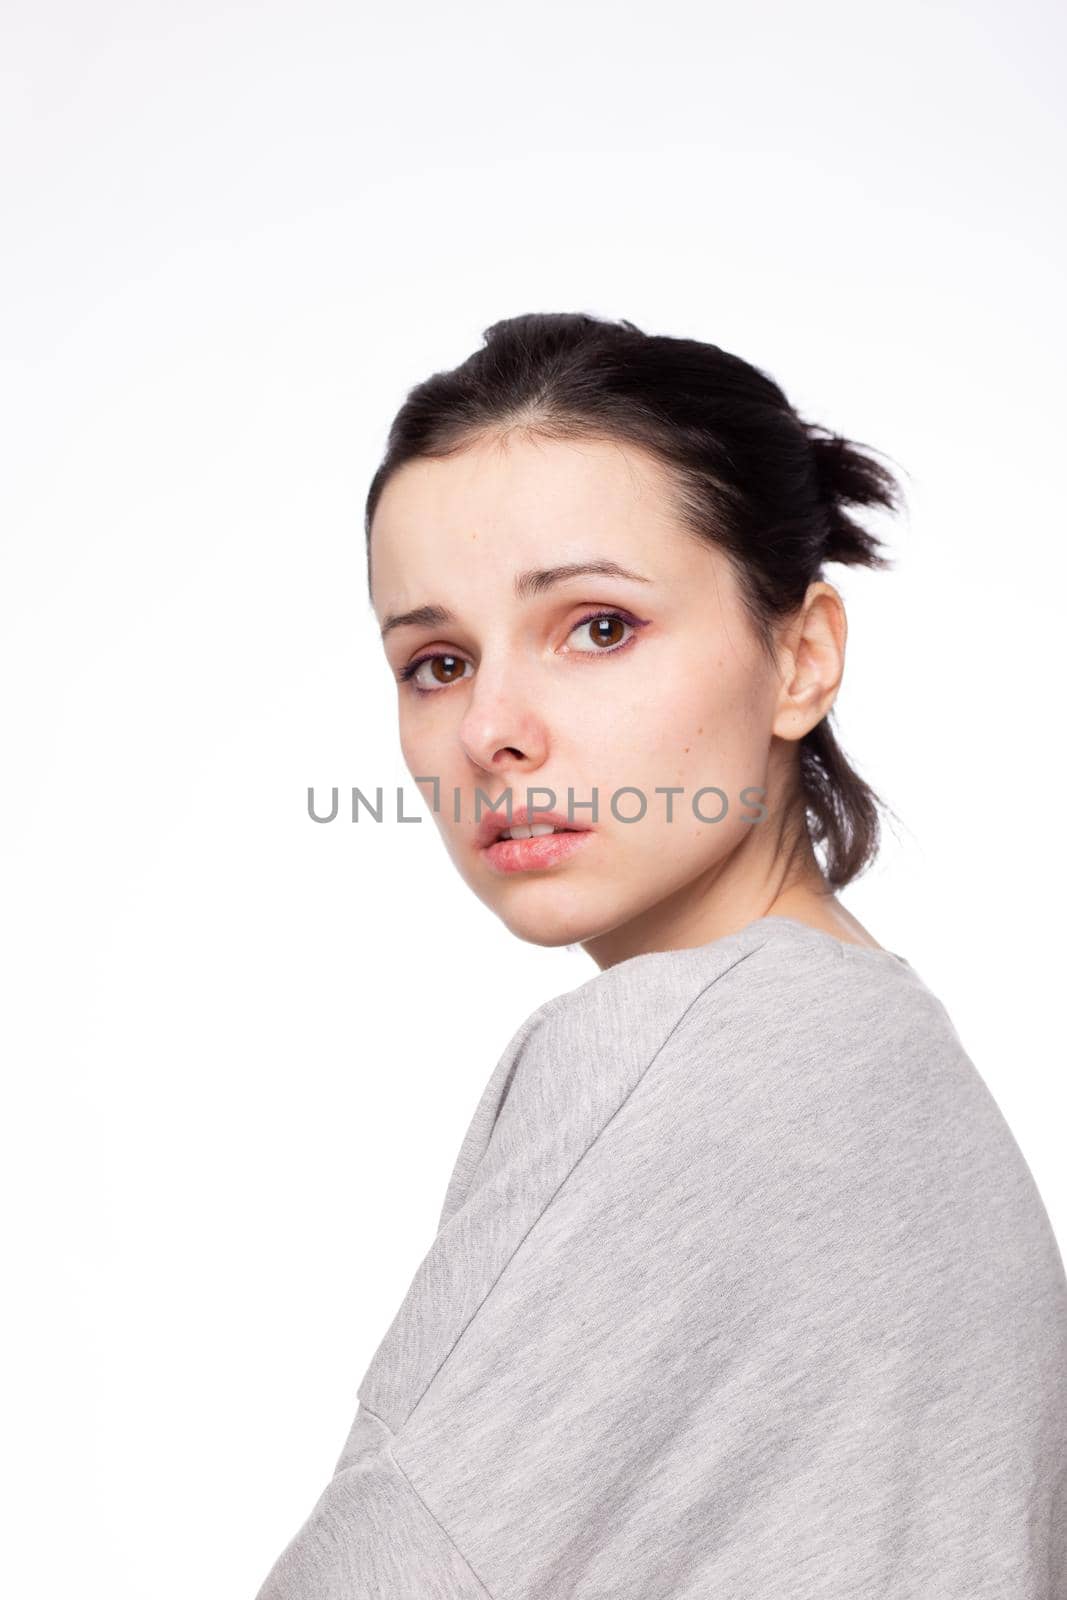 emotional woman in a gray sweatshirt, white background. High quality photo